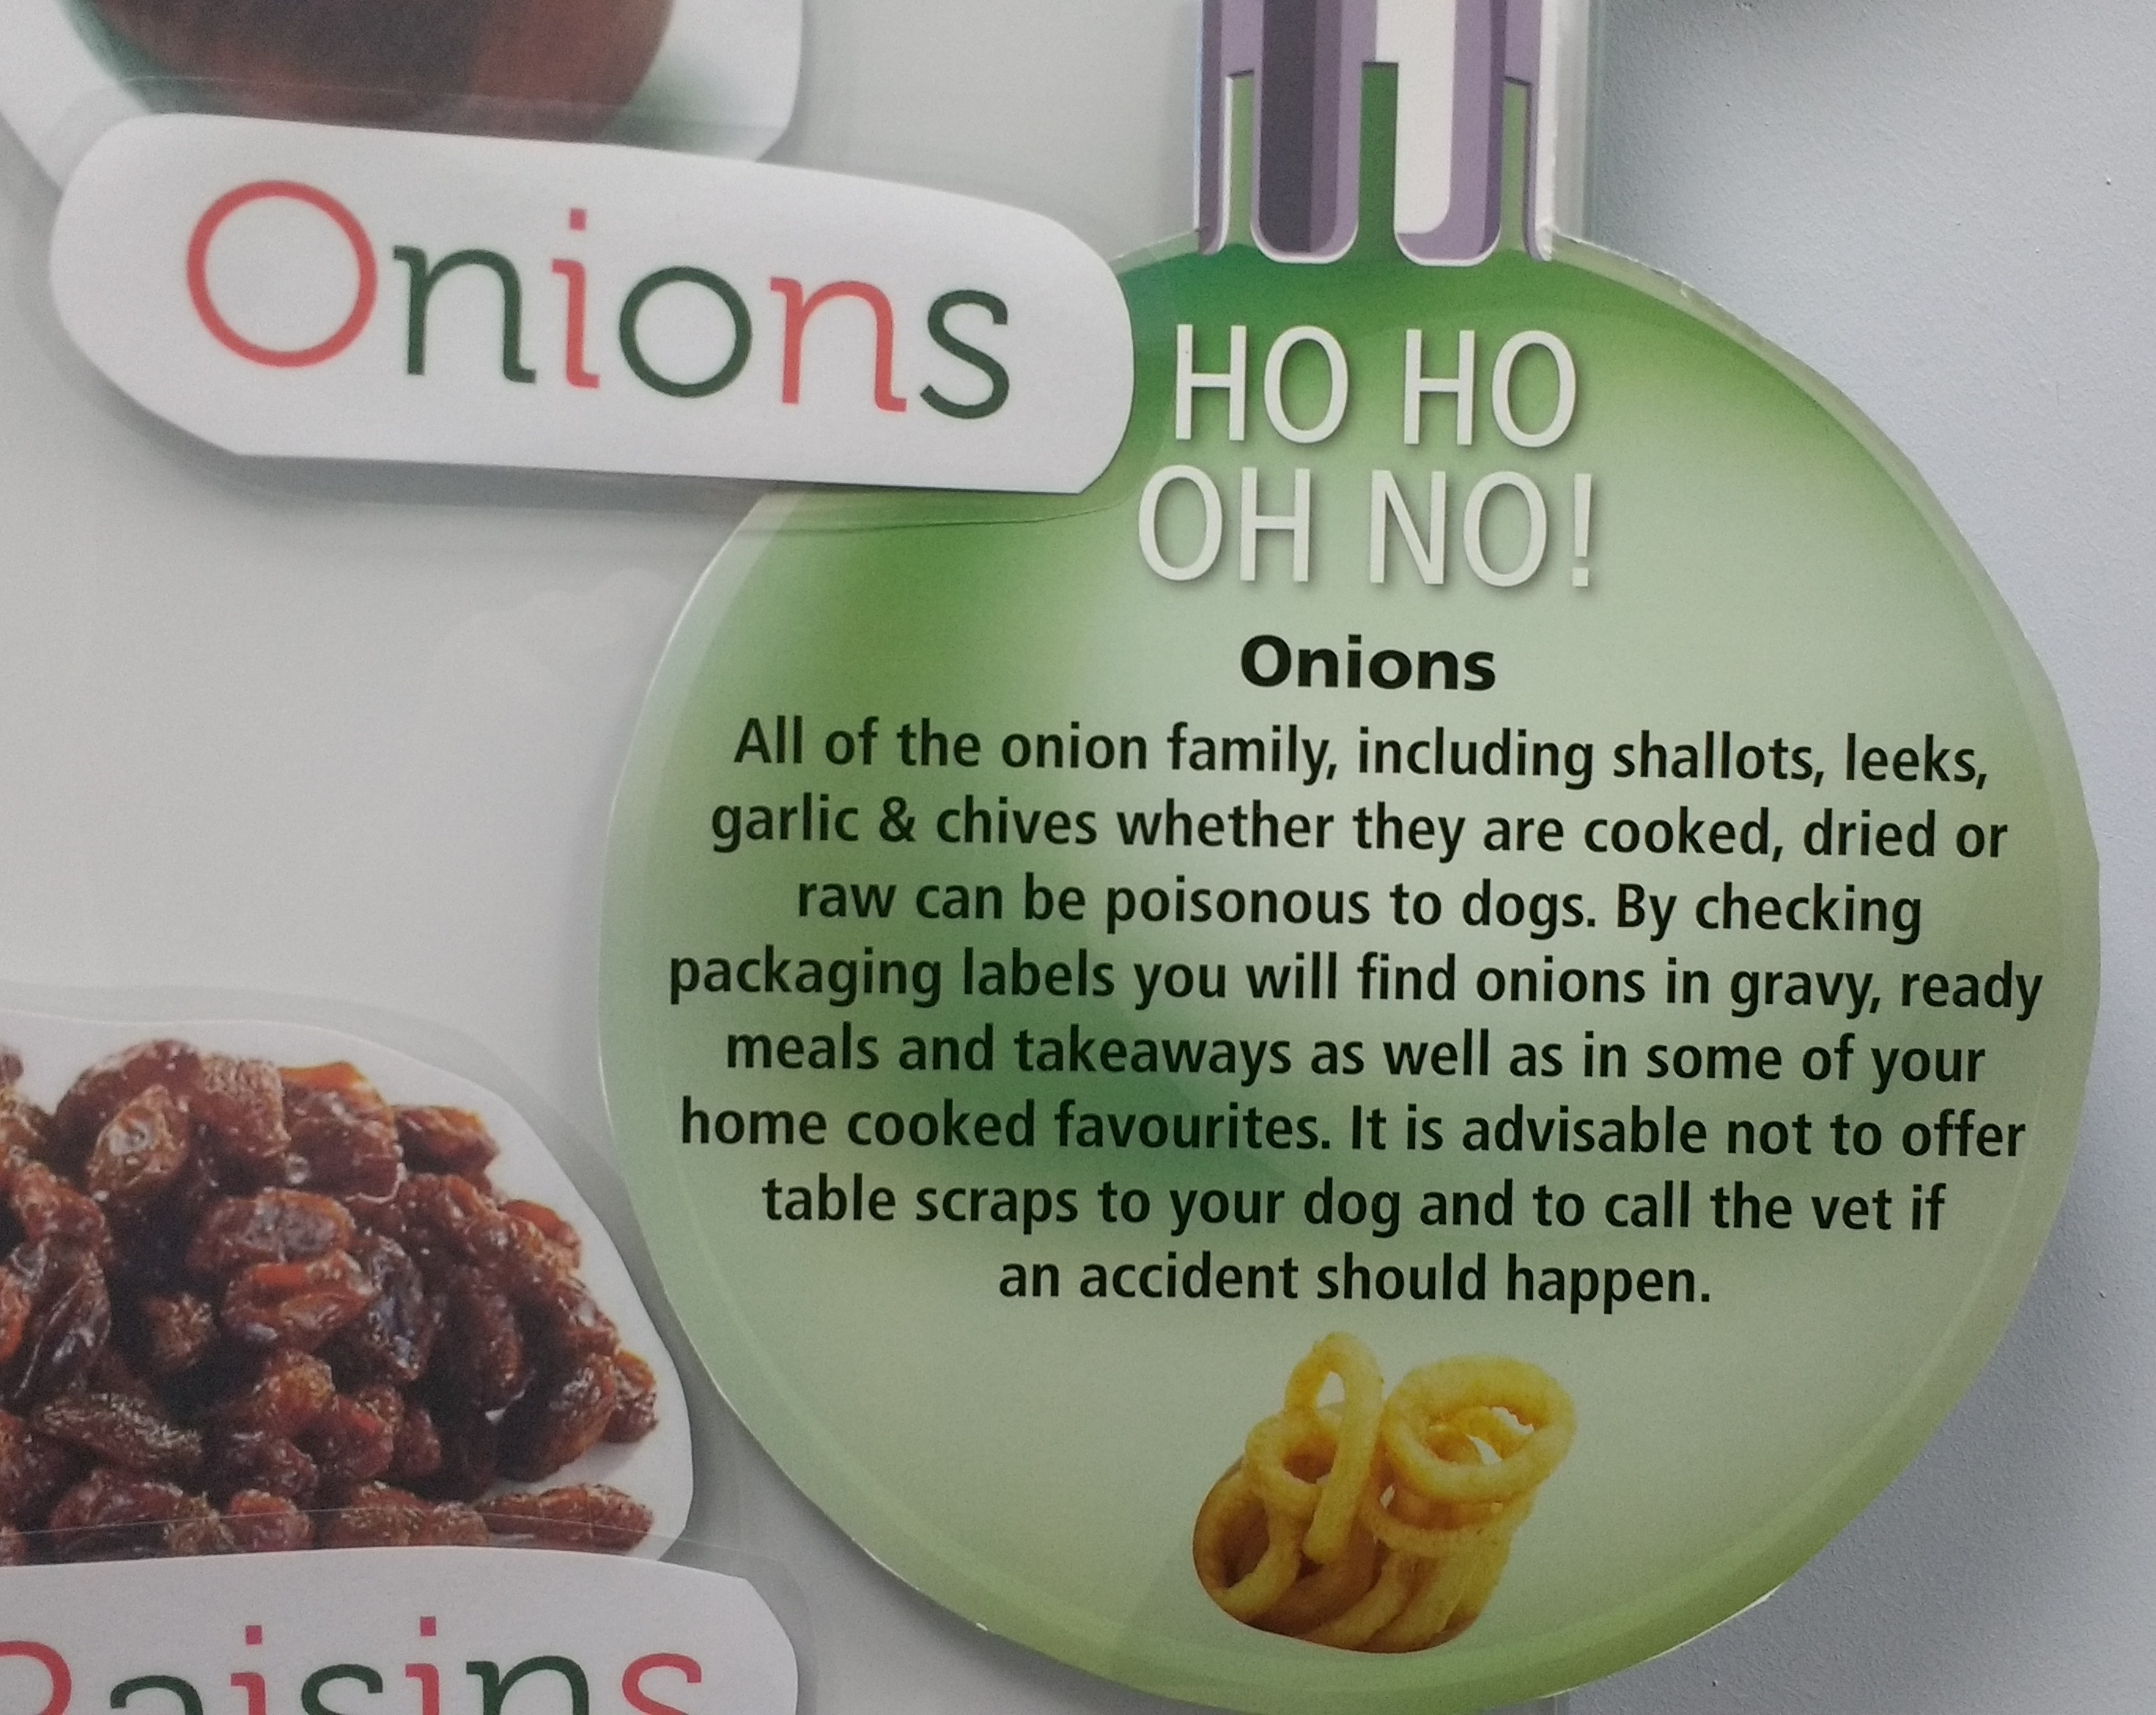 Members of the onion family can be poisonous to dogs.